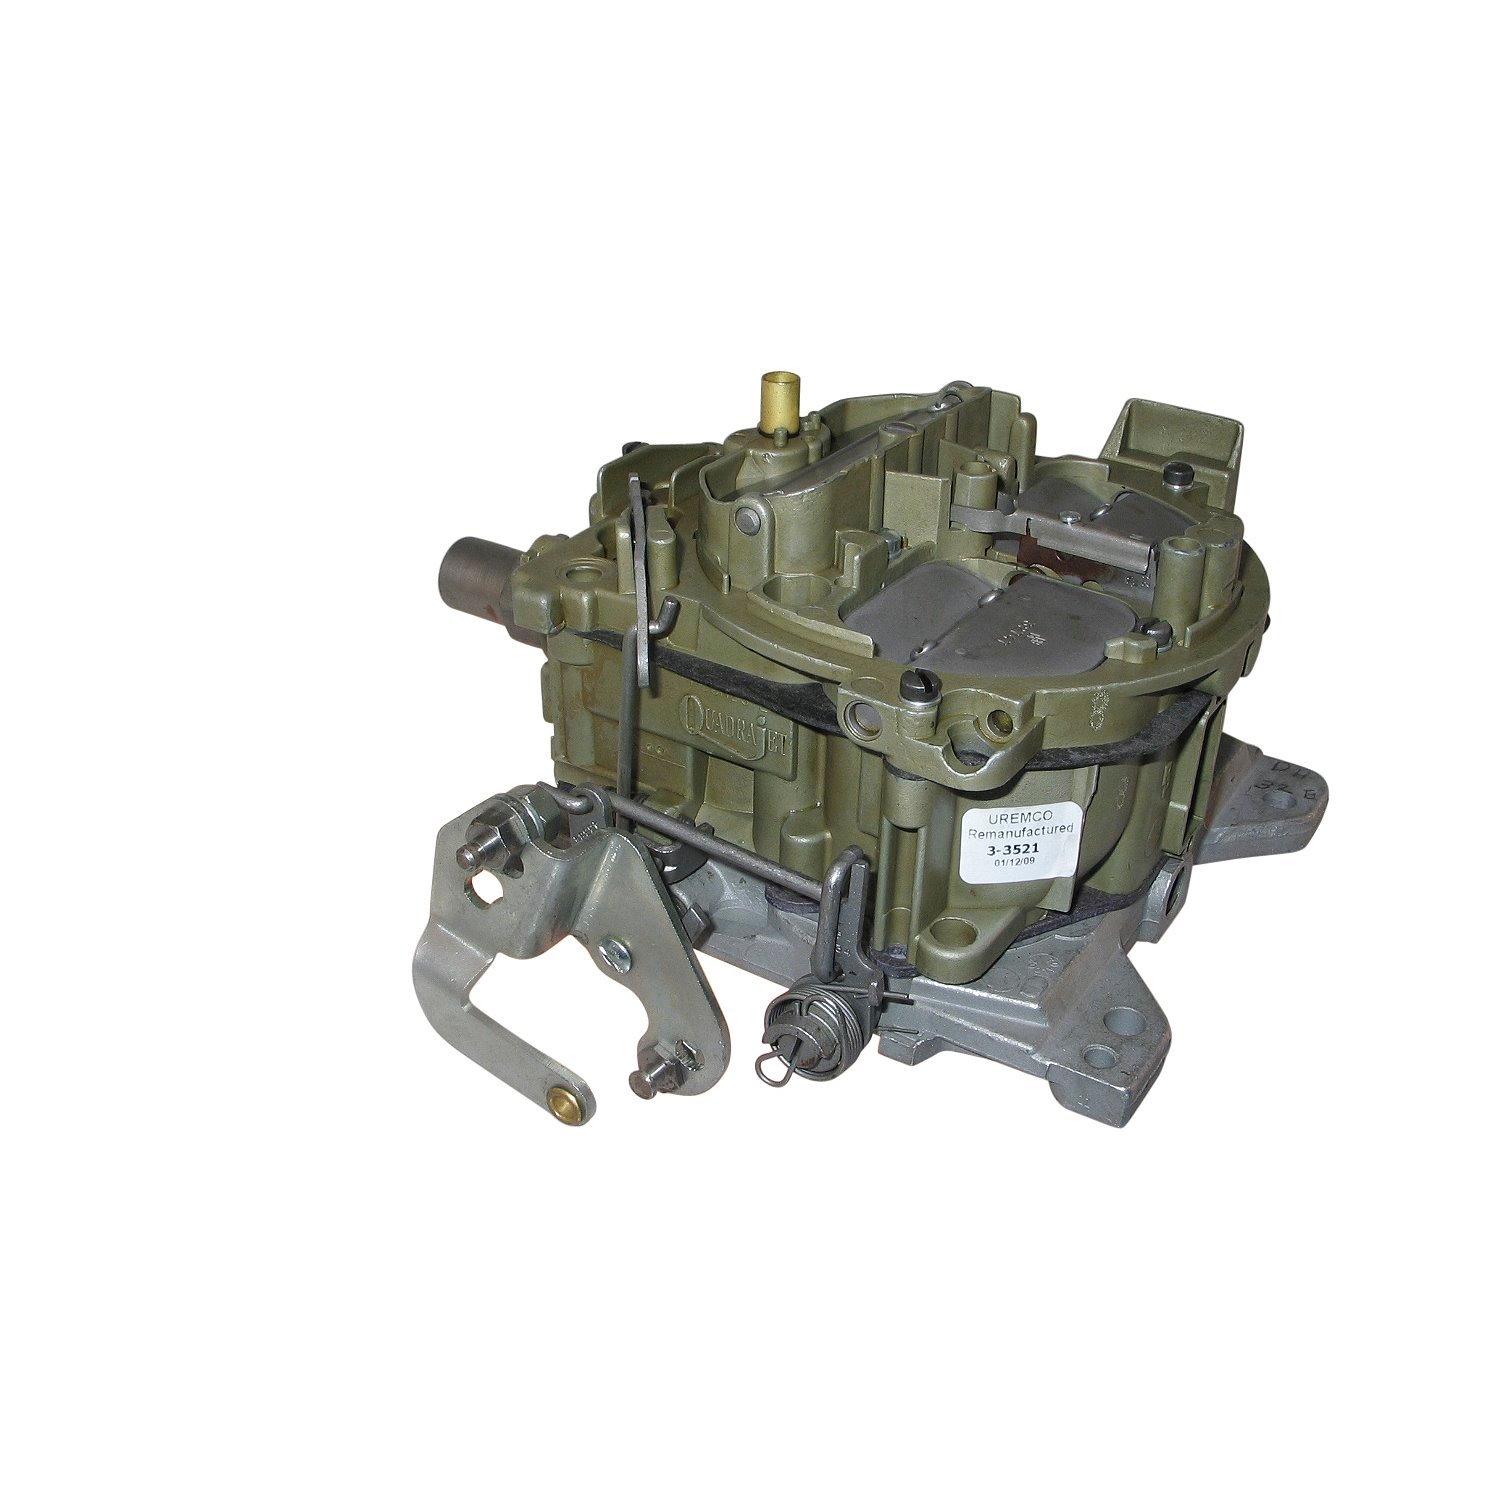 3-3522 Rochester Remanufactured Carburetor, M4ME-Style